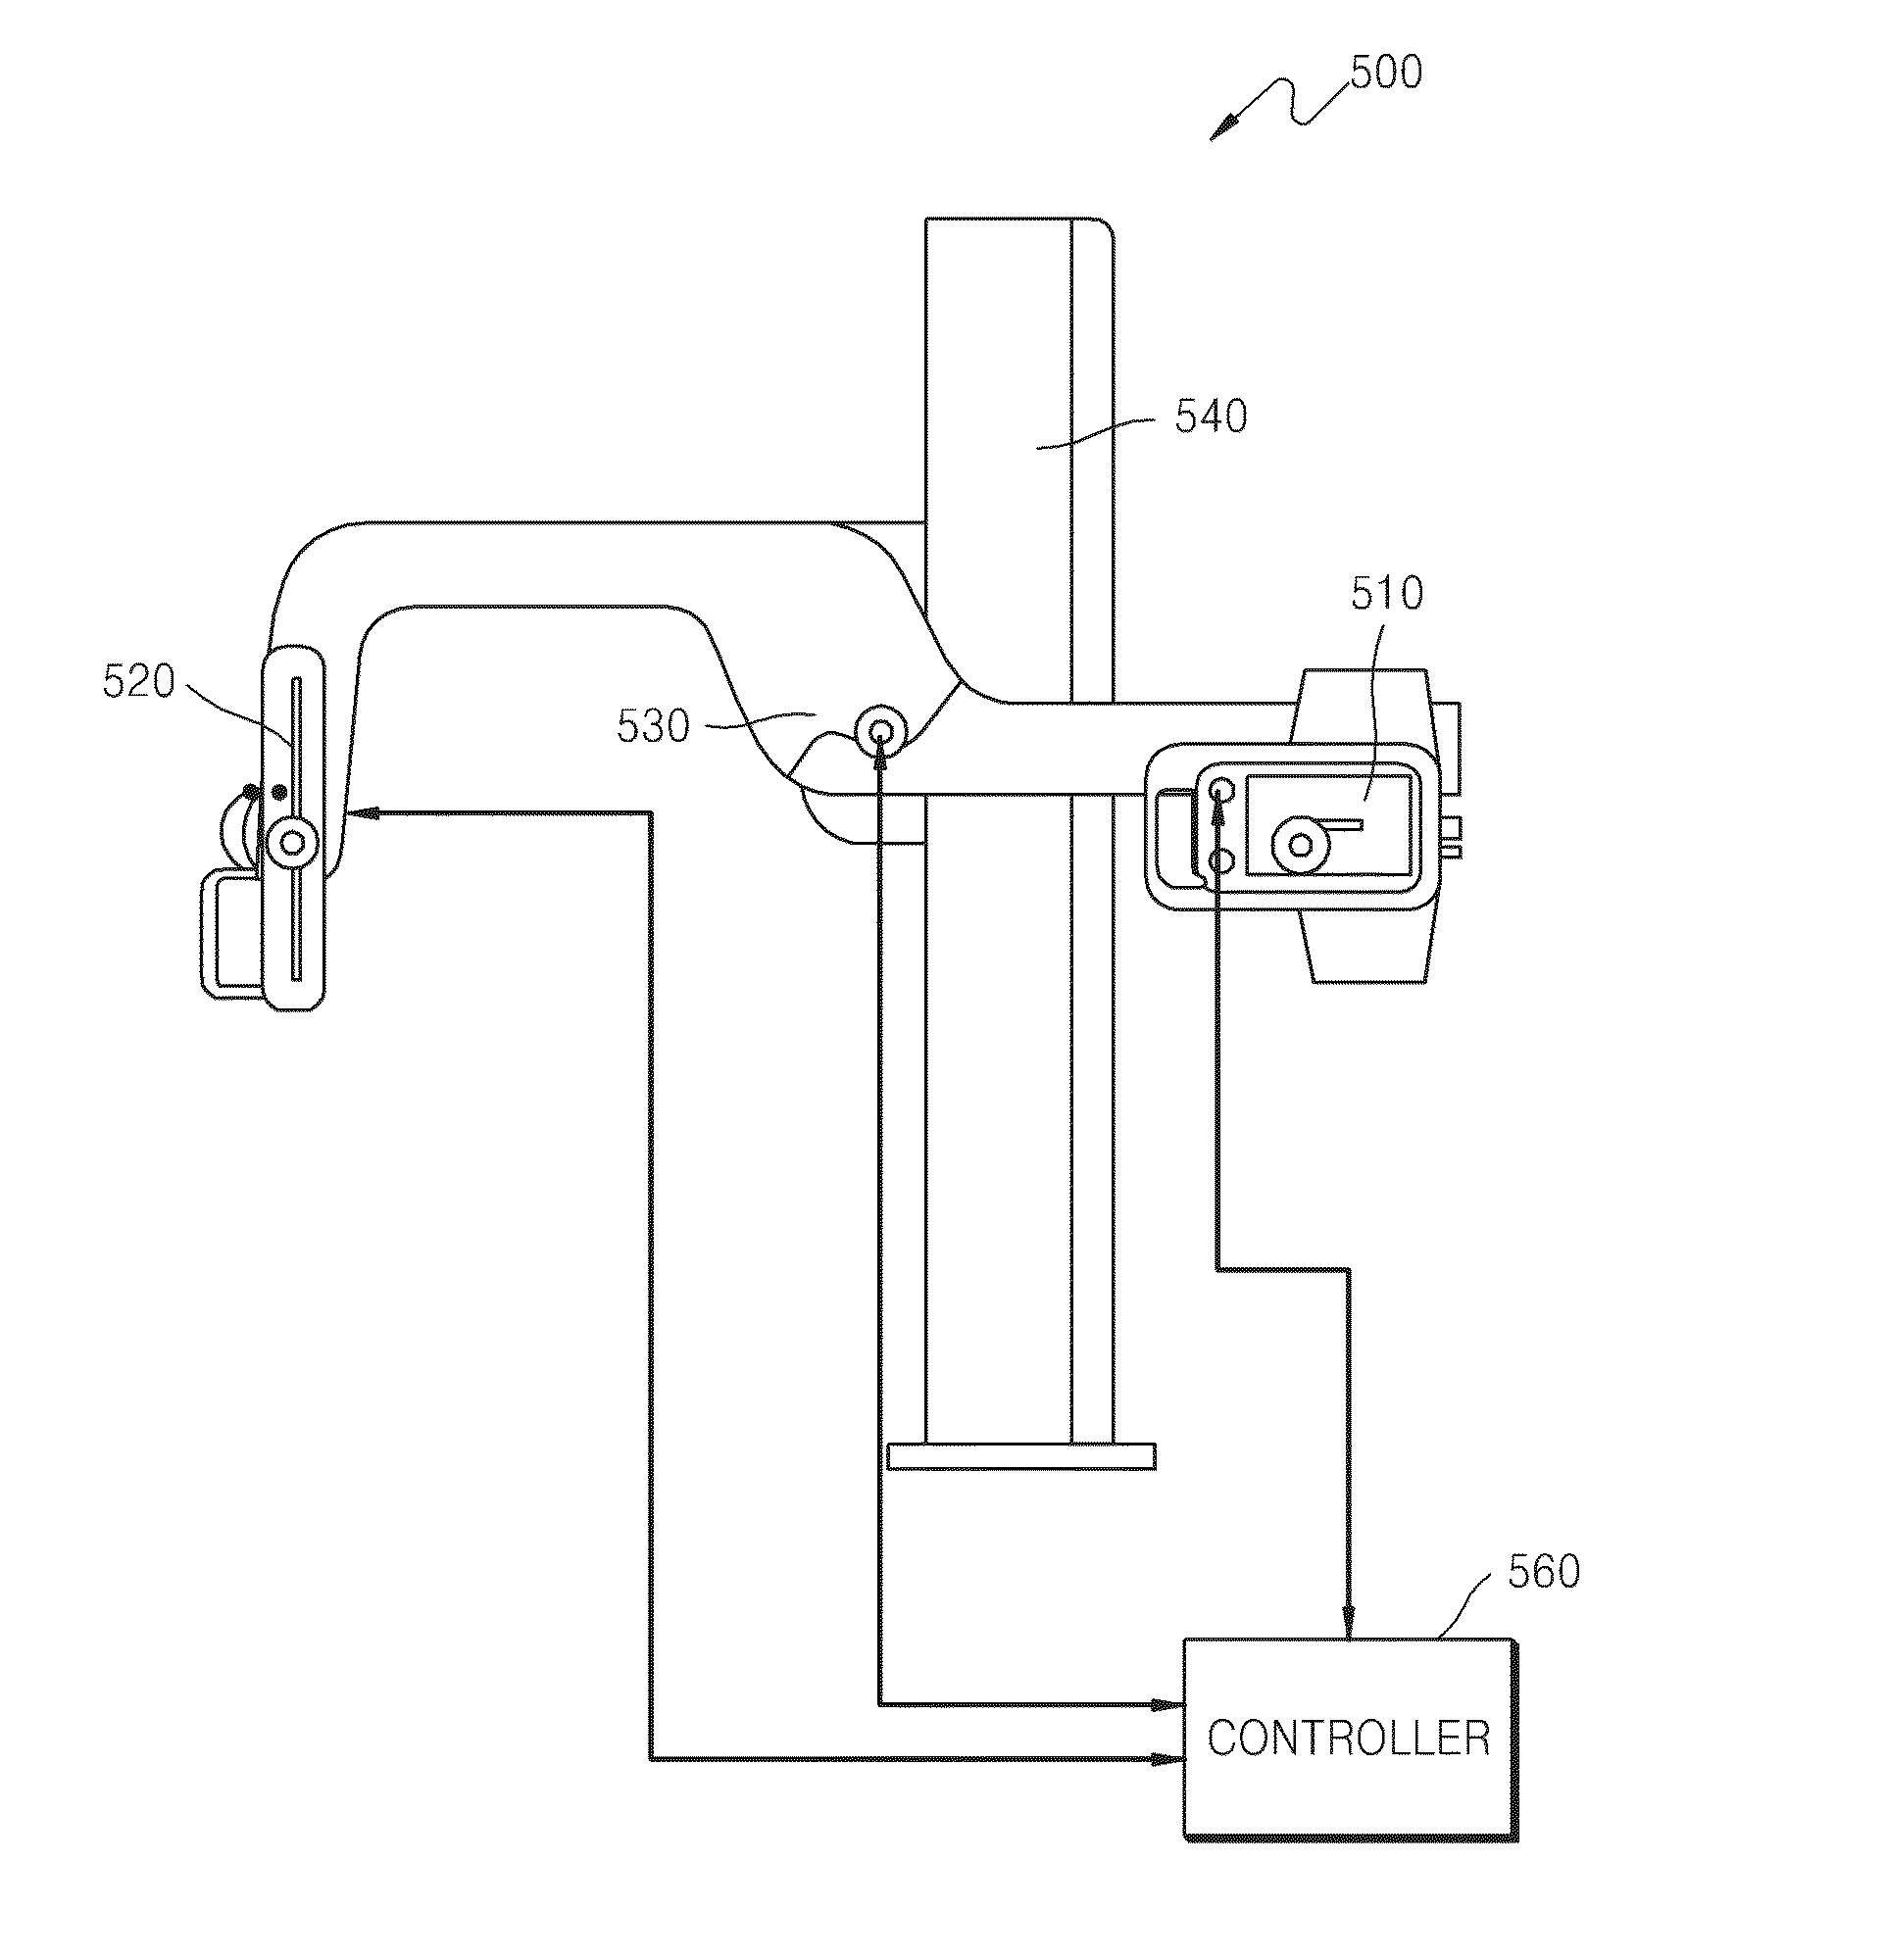 X-ray apparatus and method of obtaining x-ray image